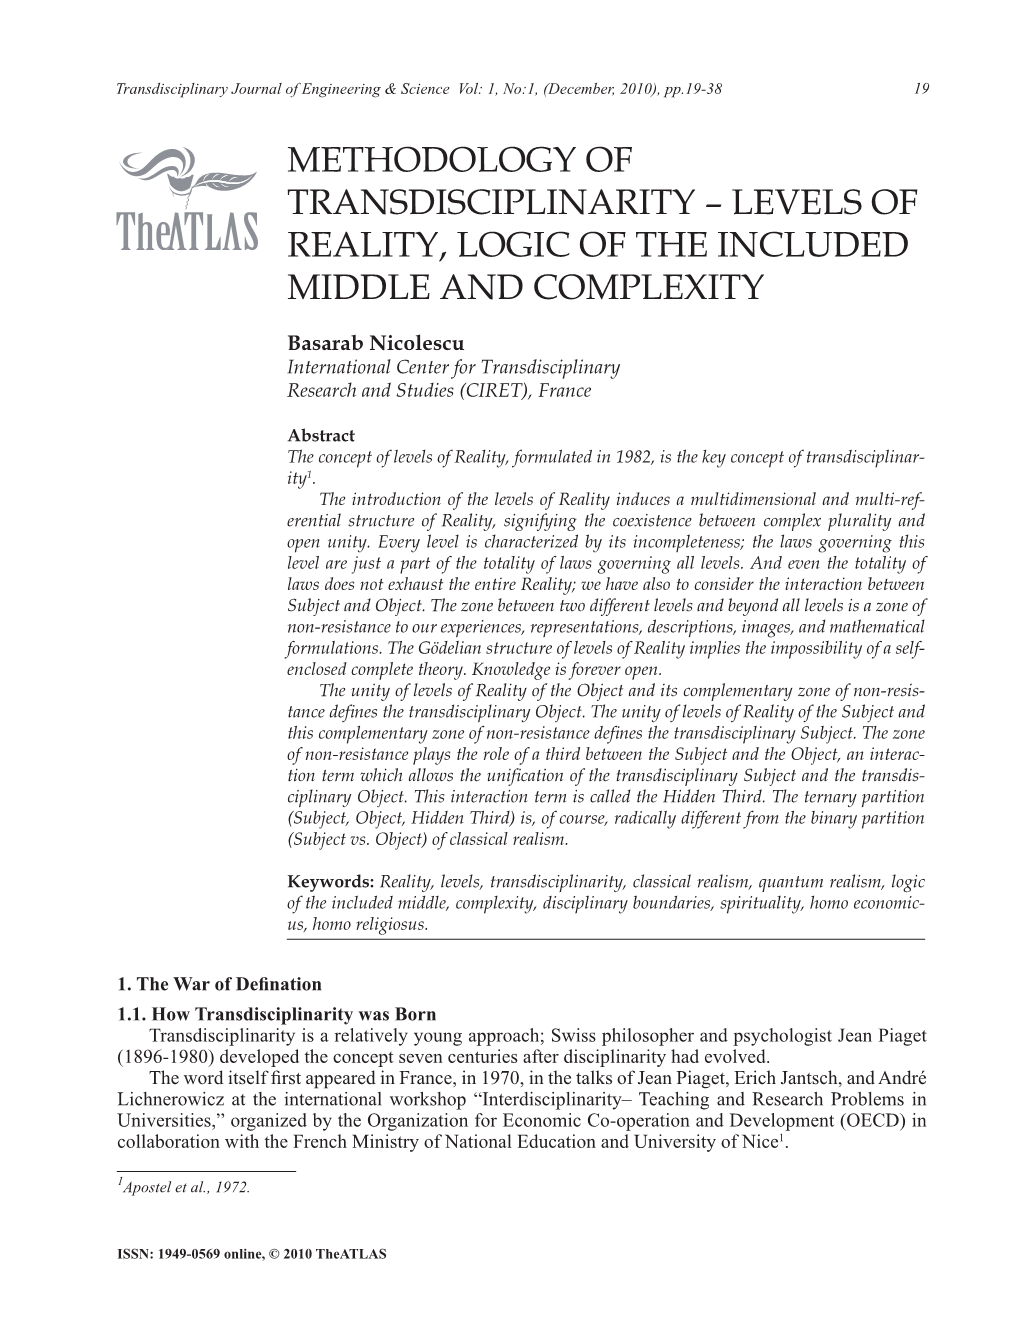 Methodology of Transdisciplinarity – Levels of Reality, Logic of the Included Middle and Complexity